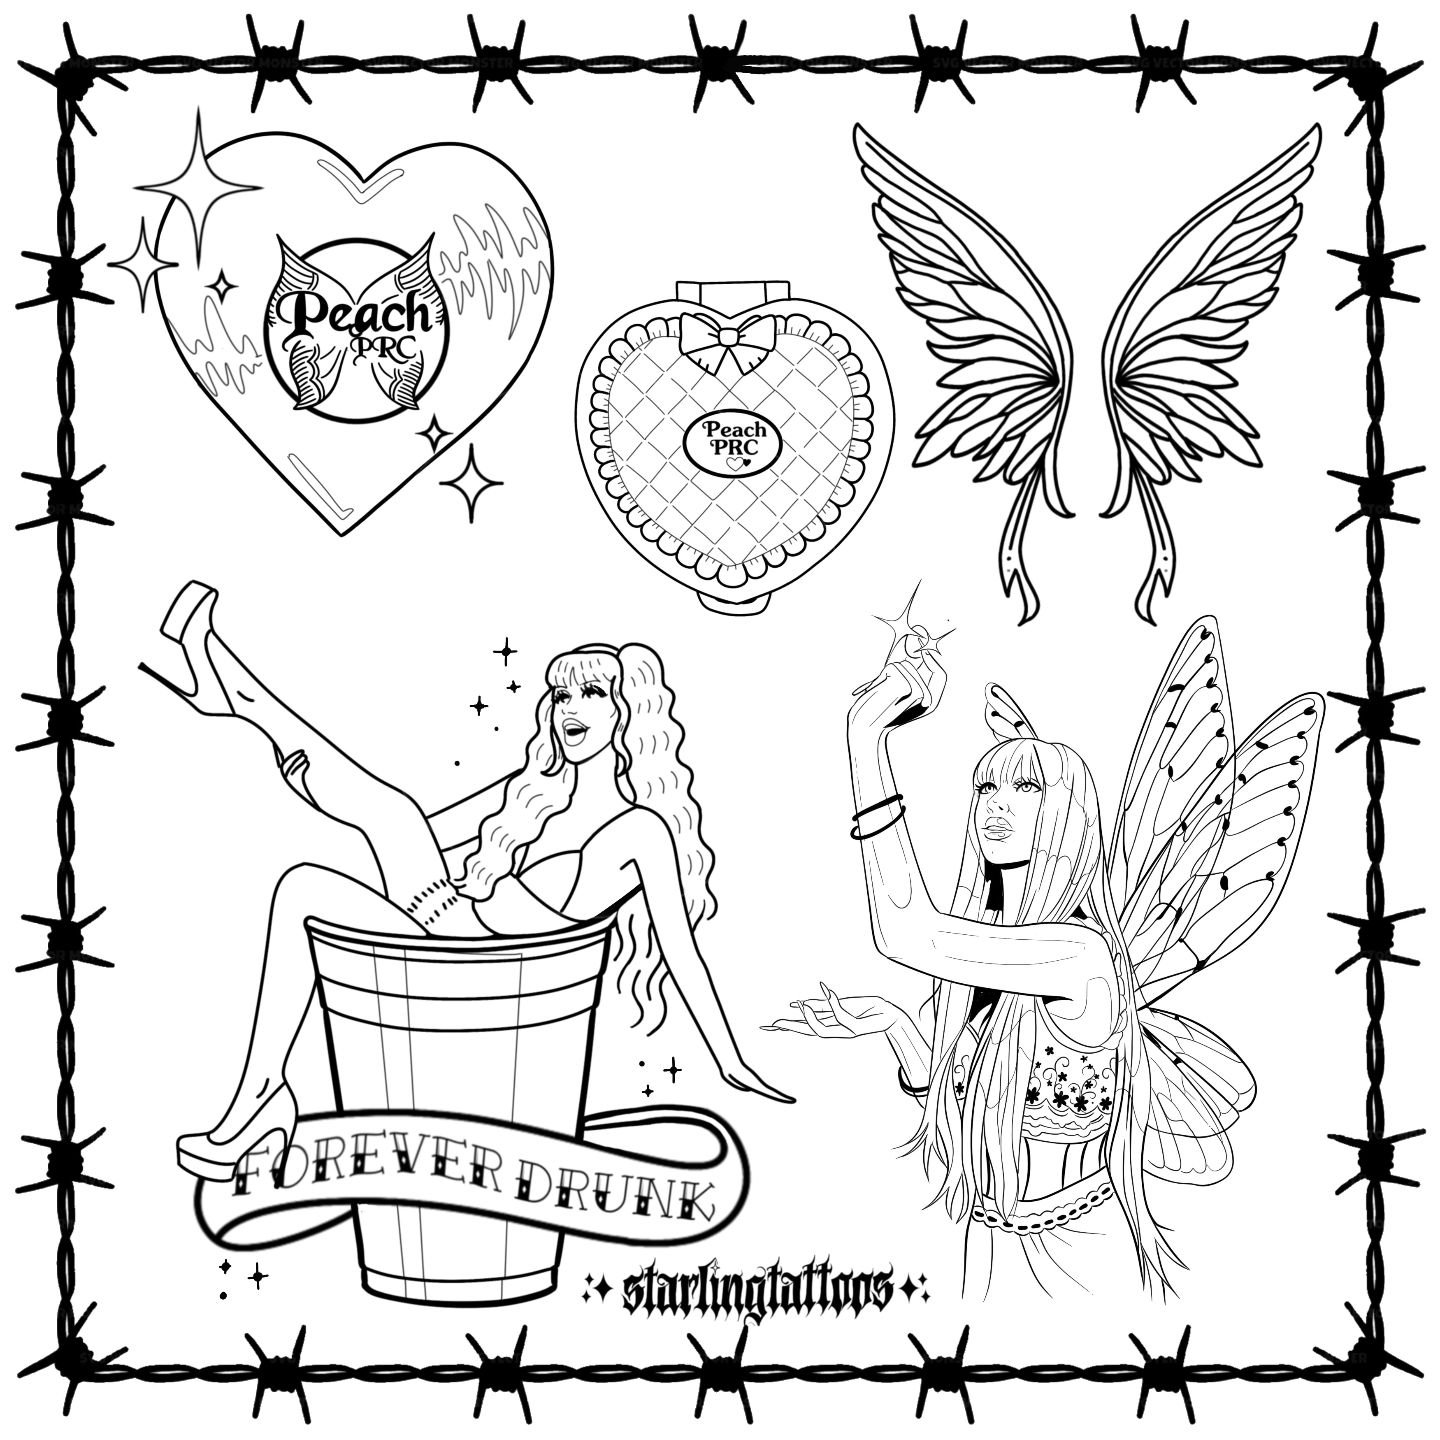 Here's a sheet for all you fans of @peachprc , the true queen of sapphic pop. ❤️🍑🧚&zwj;♀️✨️

I'm located in Portland, OR. If anyone wants one of these tattooed by me in color or black and gray, I'd be stoked to do that for you! 

If you'd still lik